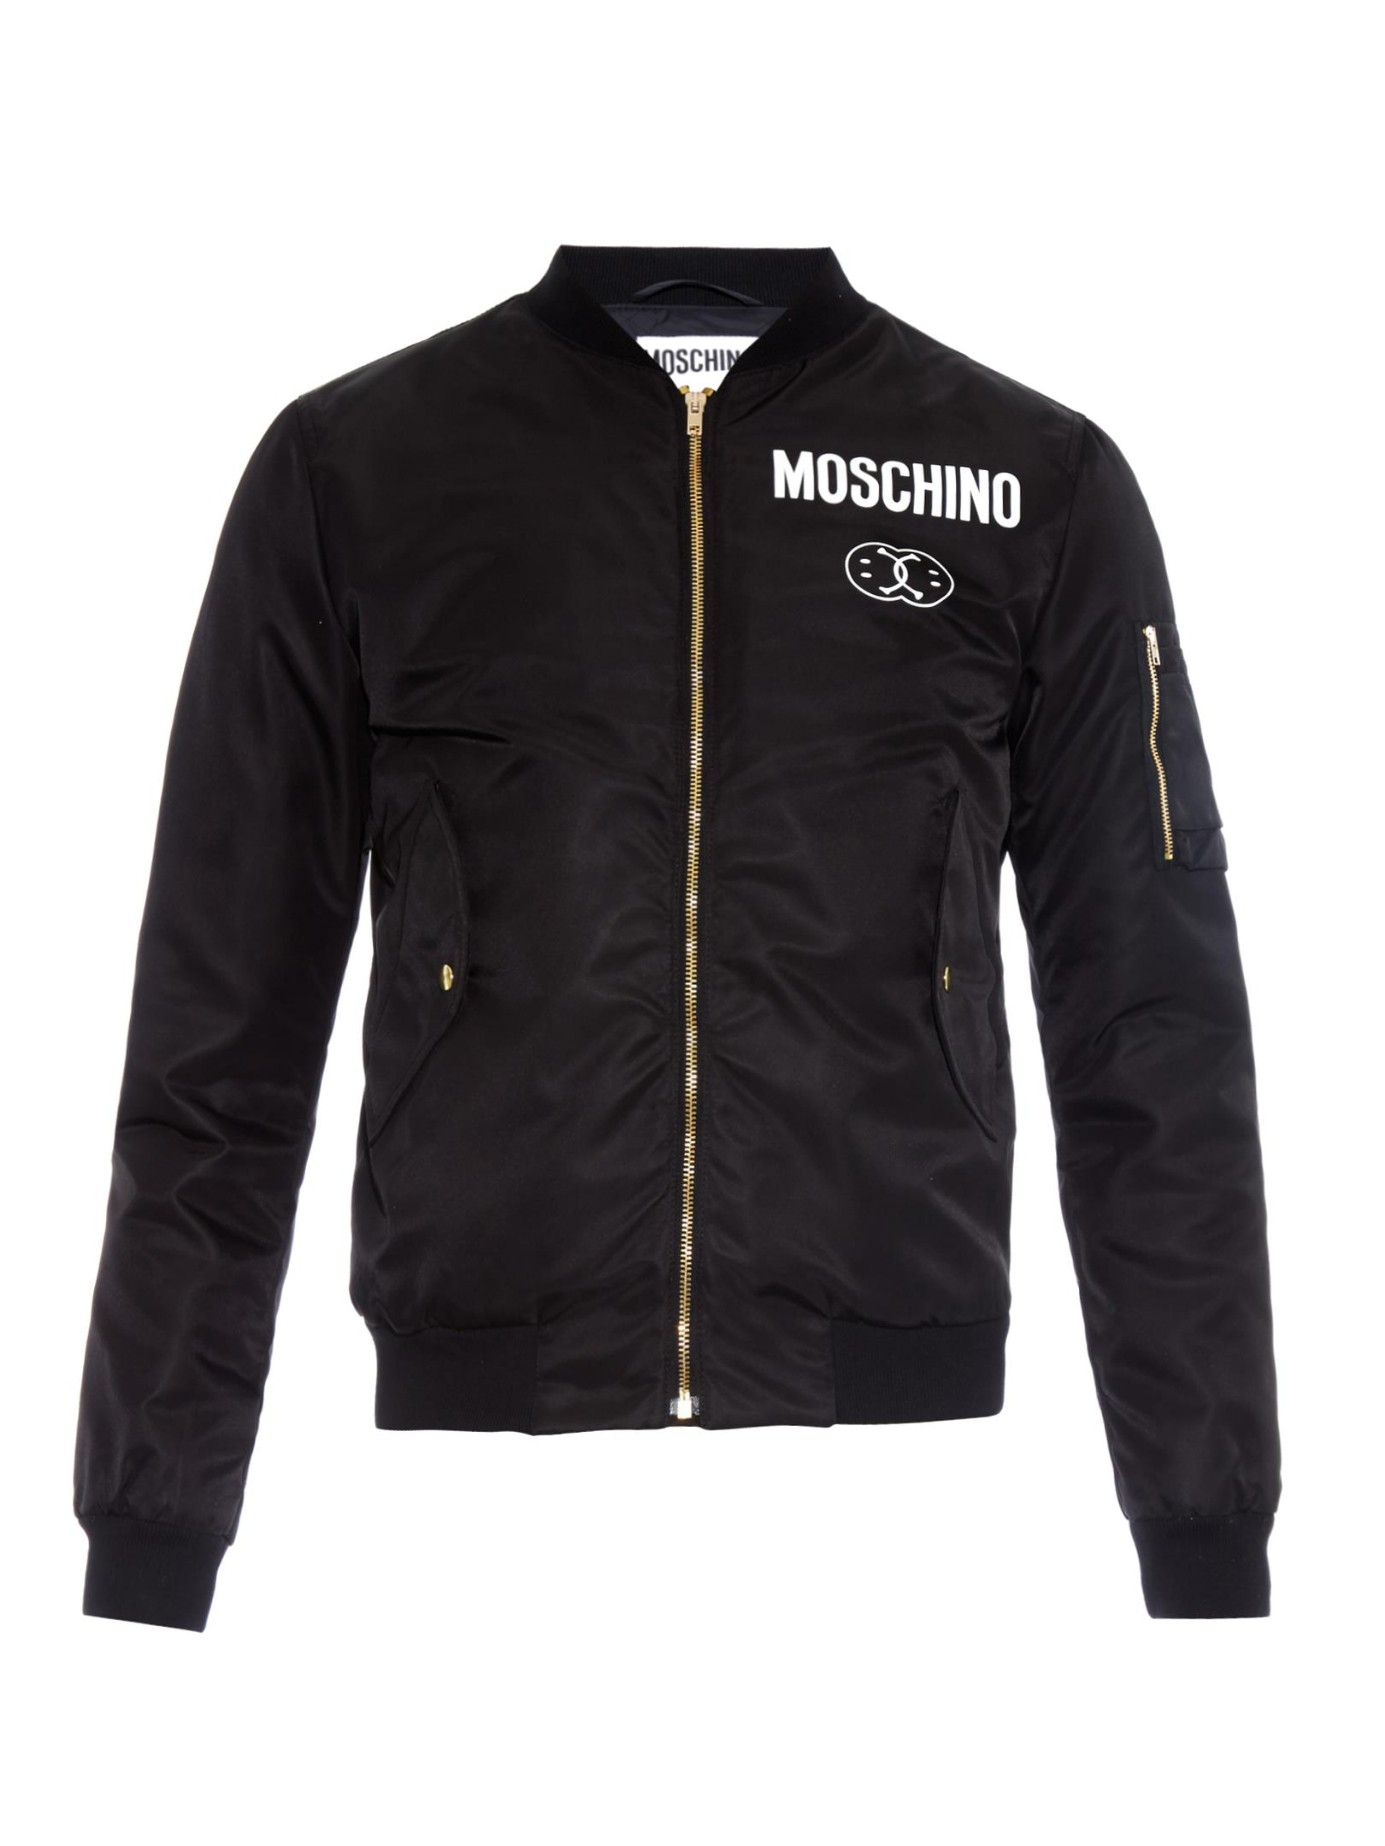 Moschino Smiley-Face Detail Bomber Jacket in Black for Men | Lyst